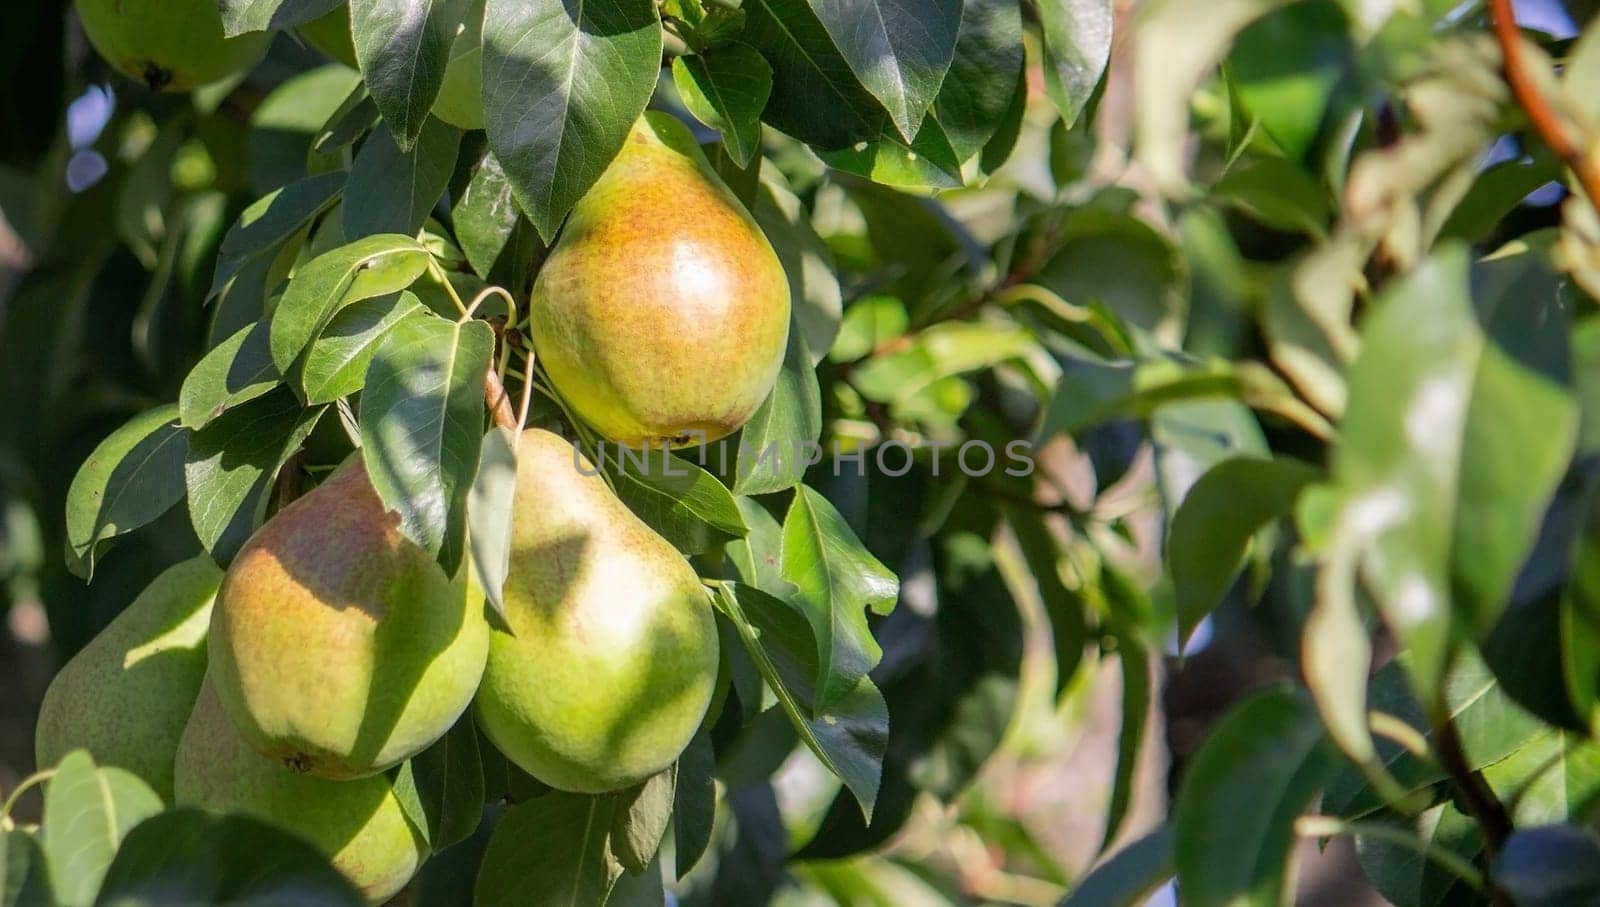 Branch of ripe organic cultivar of pears close-up in the summer garden by Anuta23